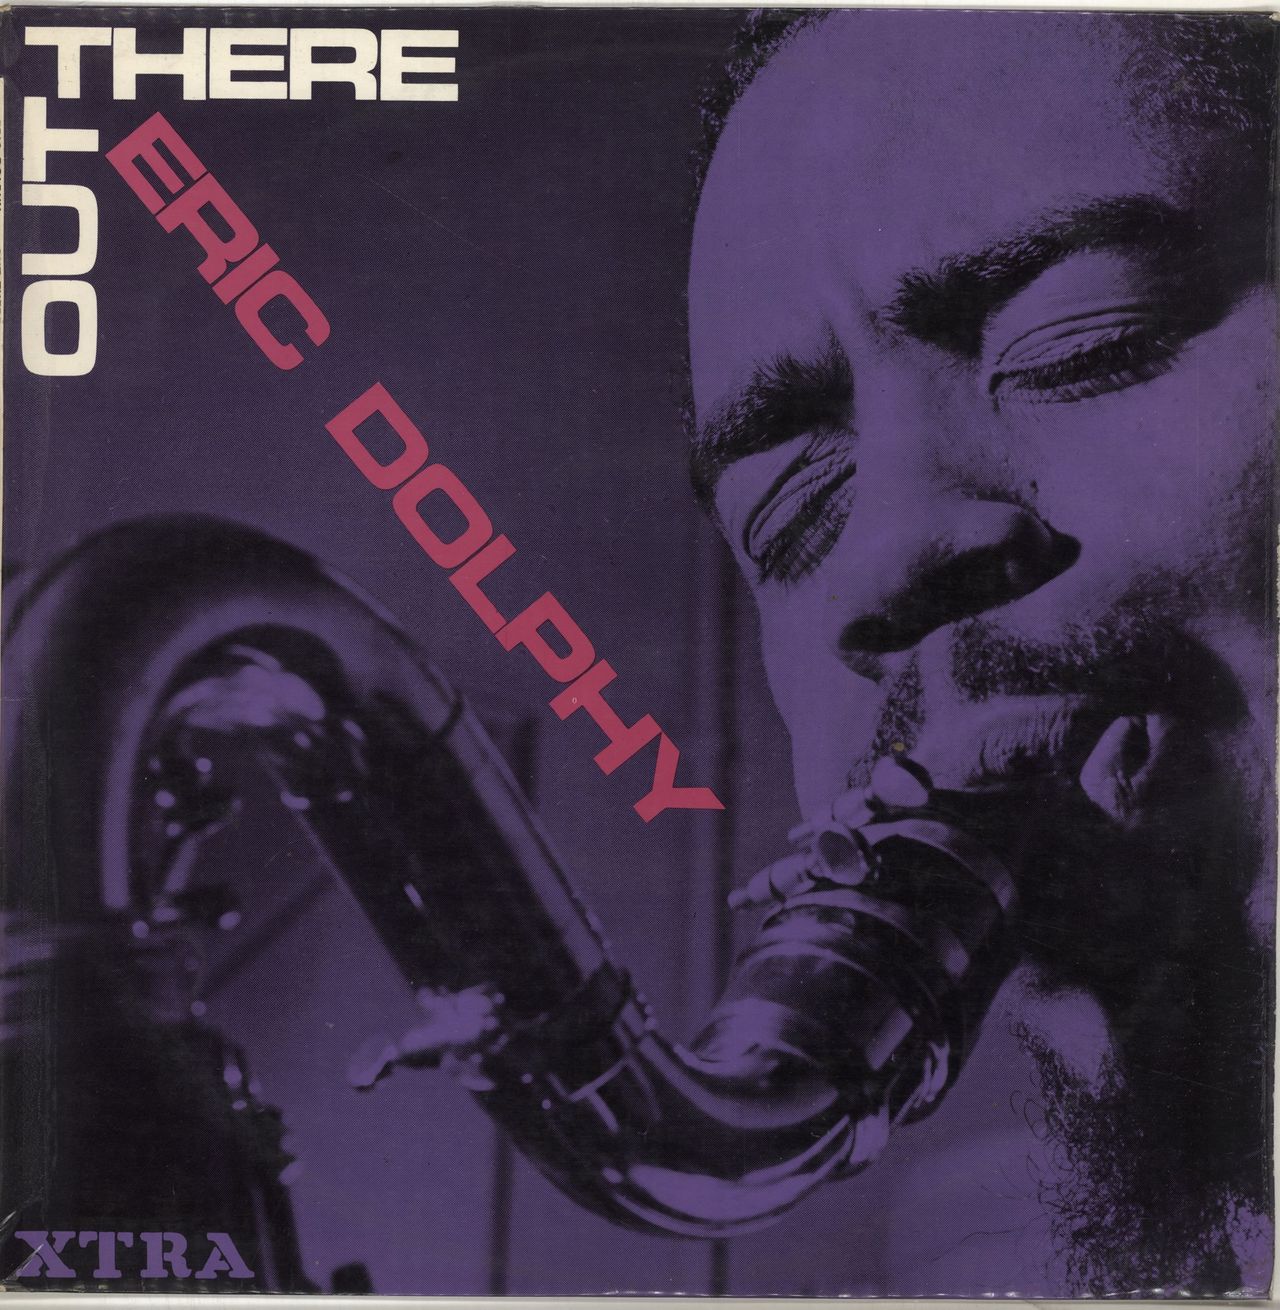 Eric Dolphy Out There UK Vinyl LP — RareVinyl.com